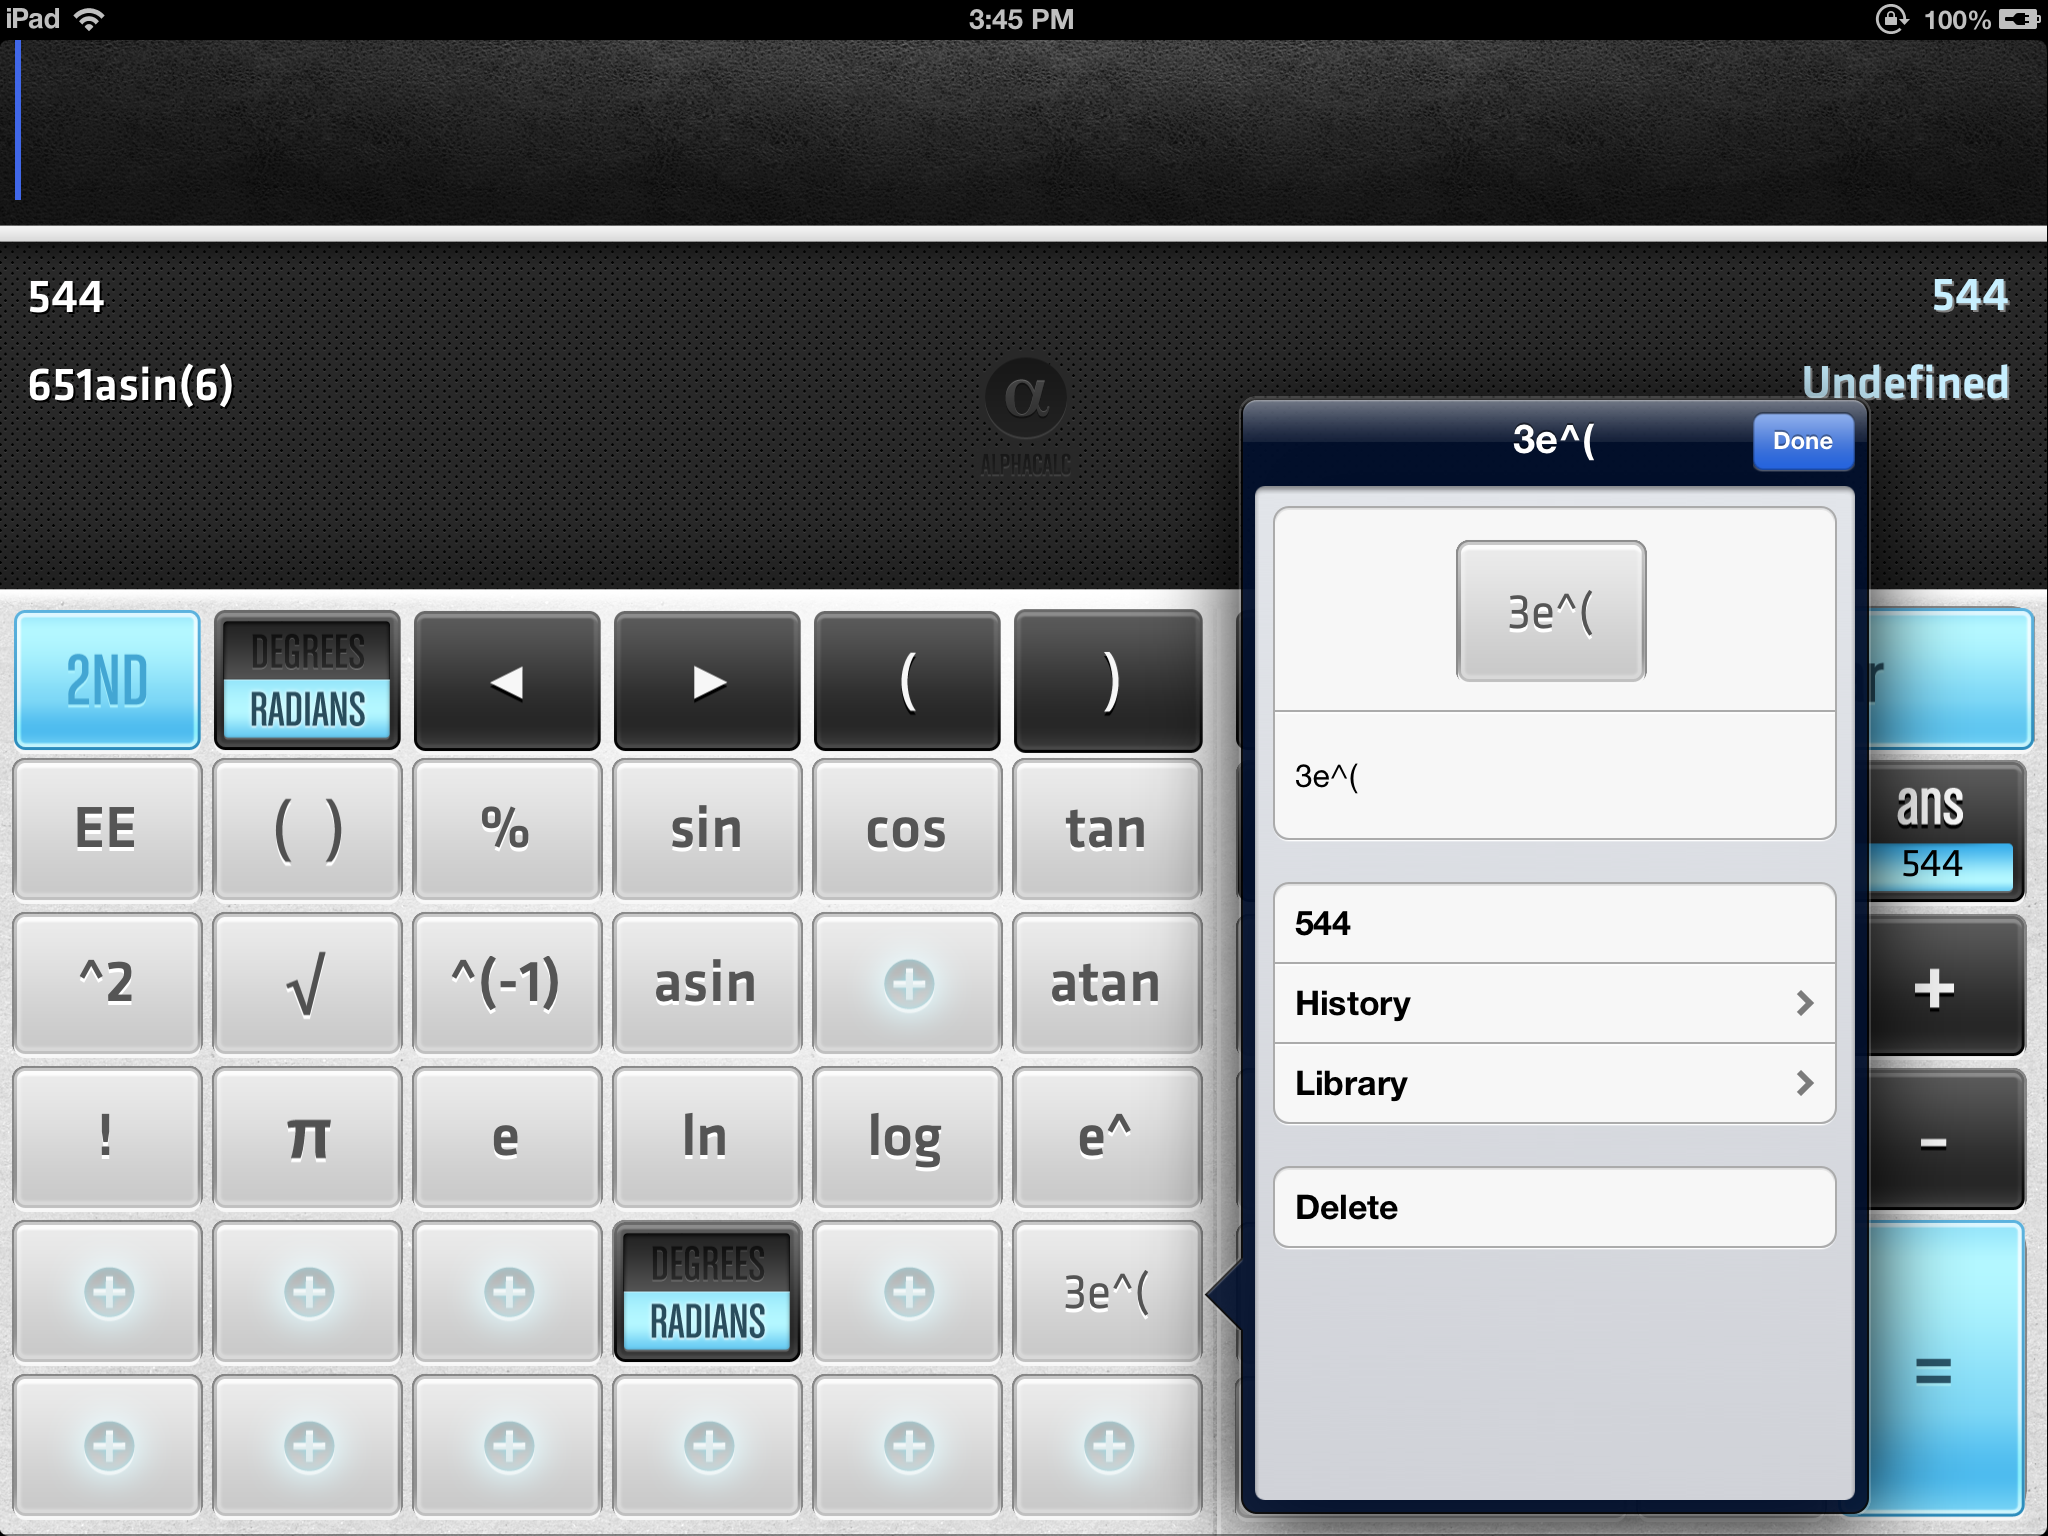 iPad and iPhone Calculator App “Alpha Calc” Universal Edition Launches